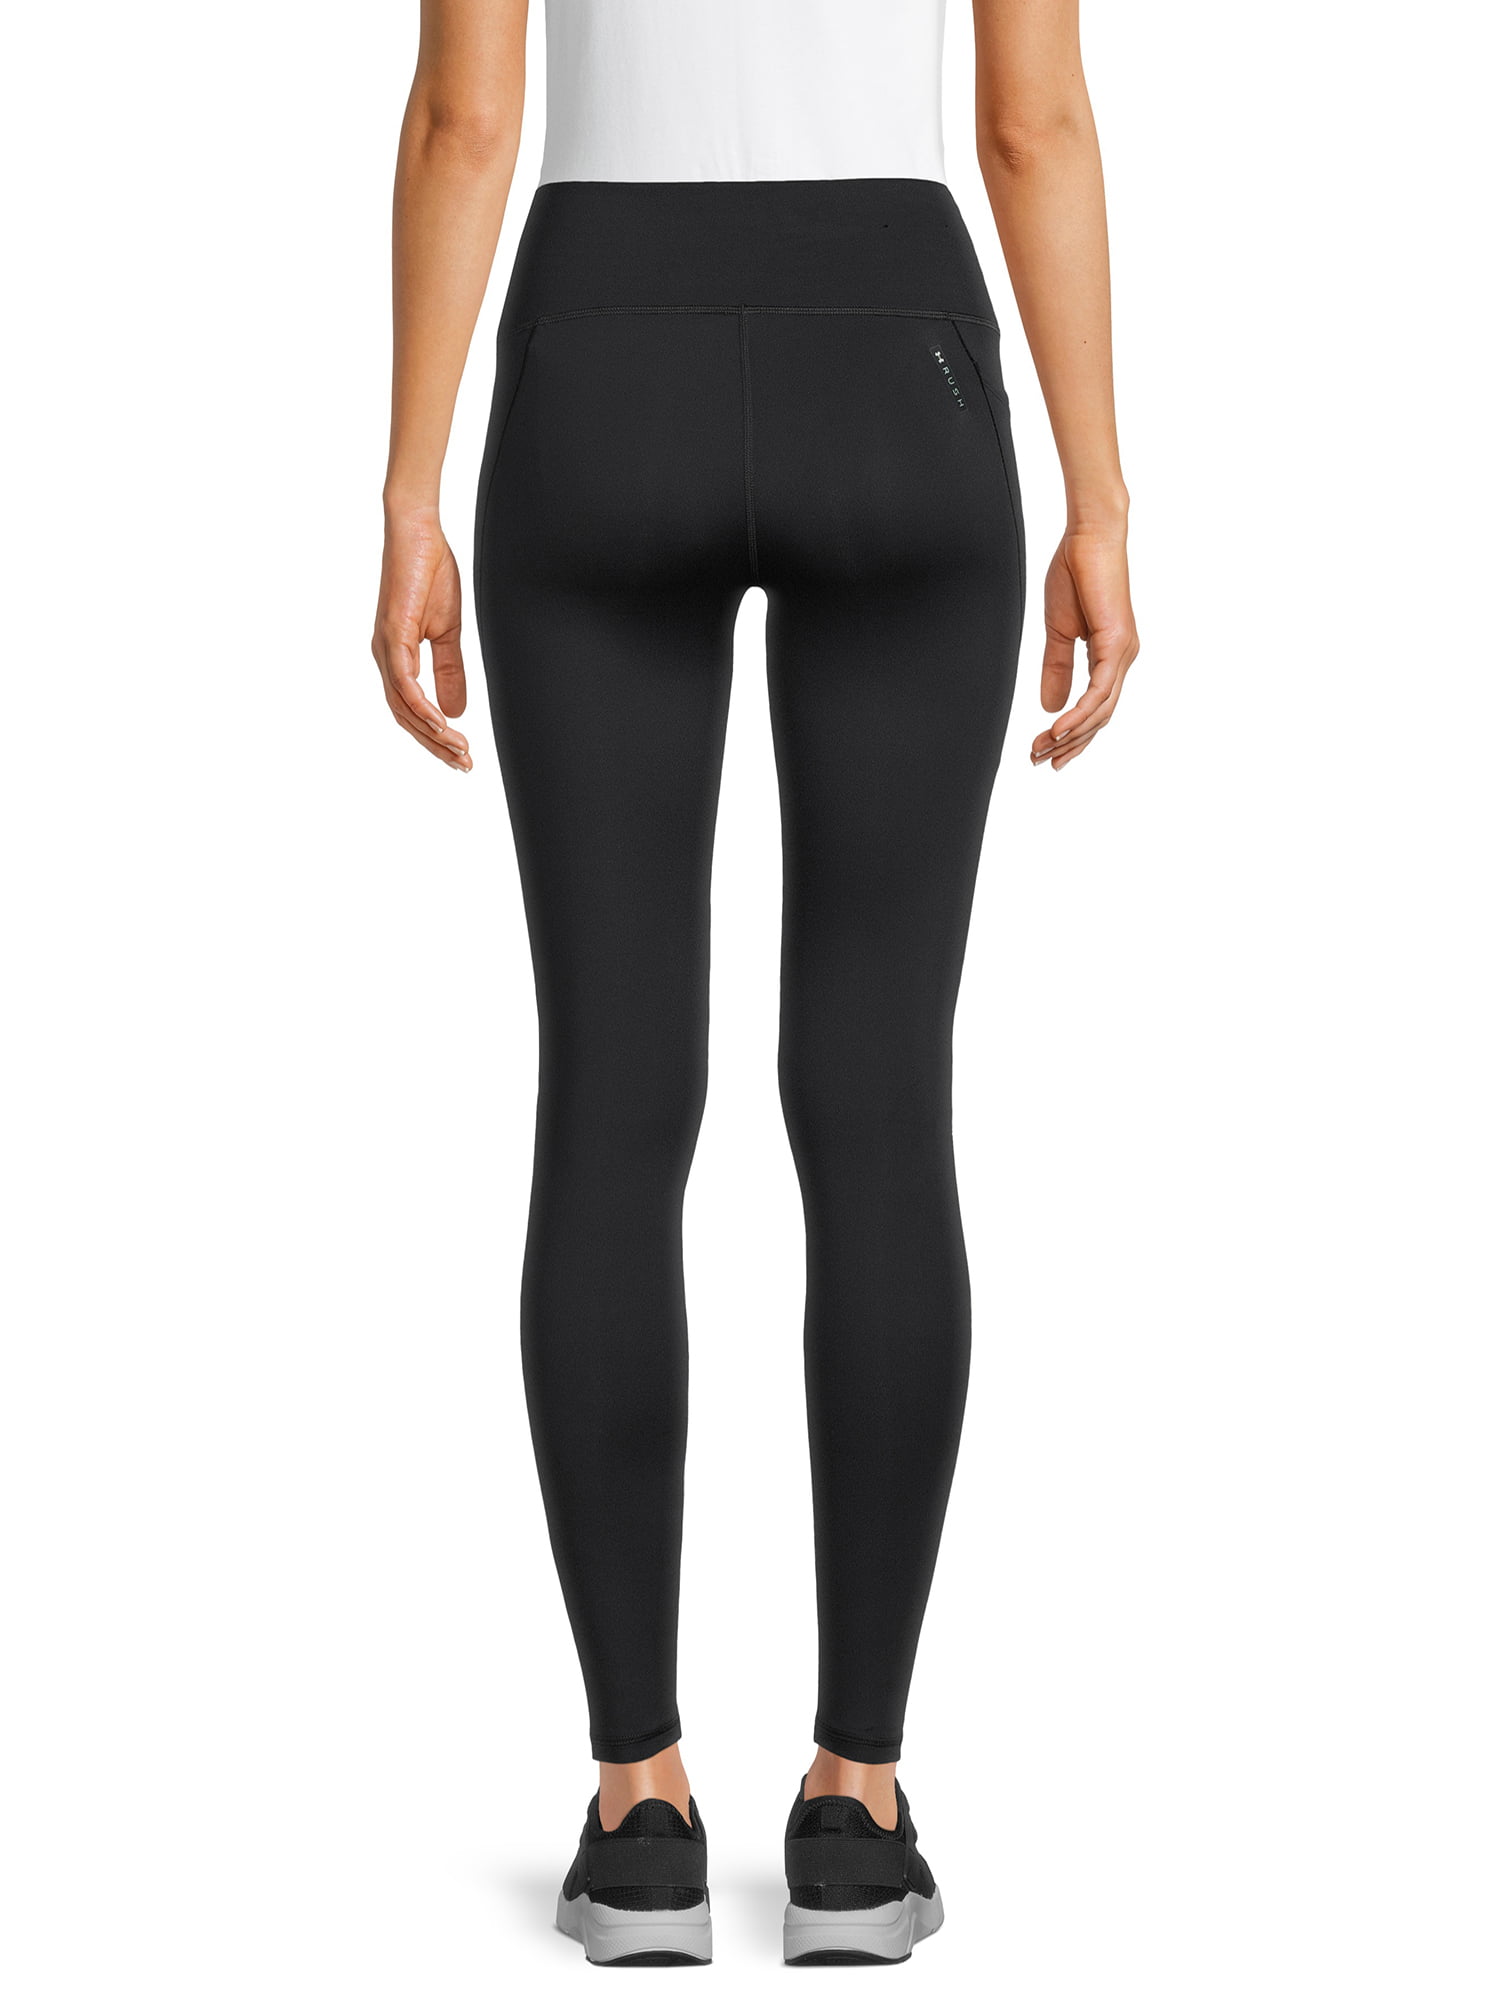 Under Armour, Pants & Jumpsuits, Under Armor Womens Cold Gear Compression  Leggings